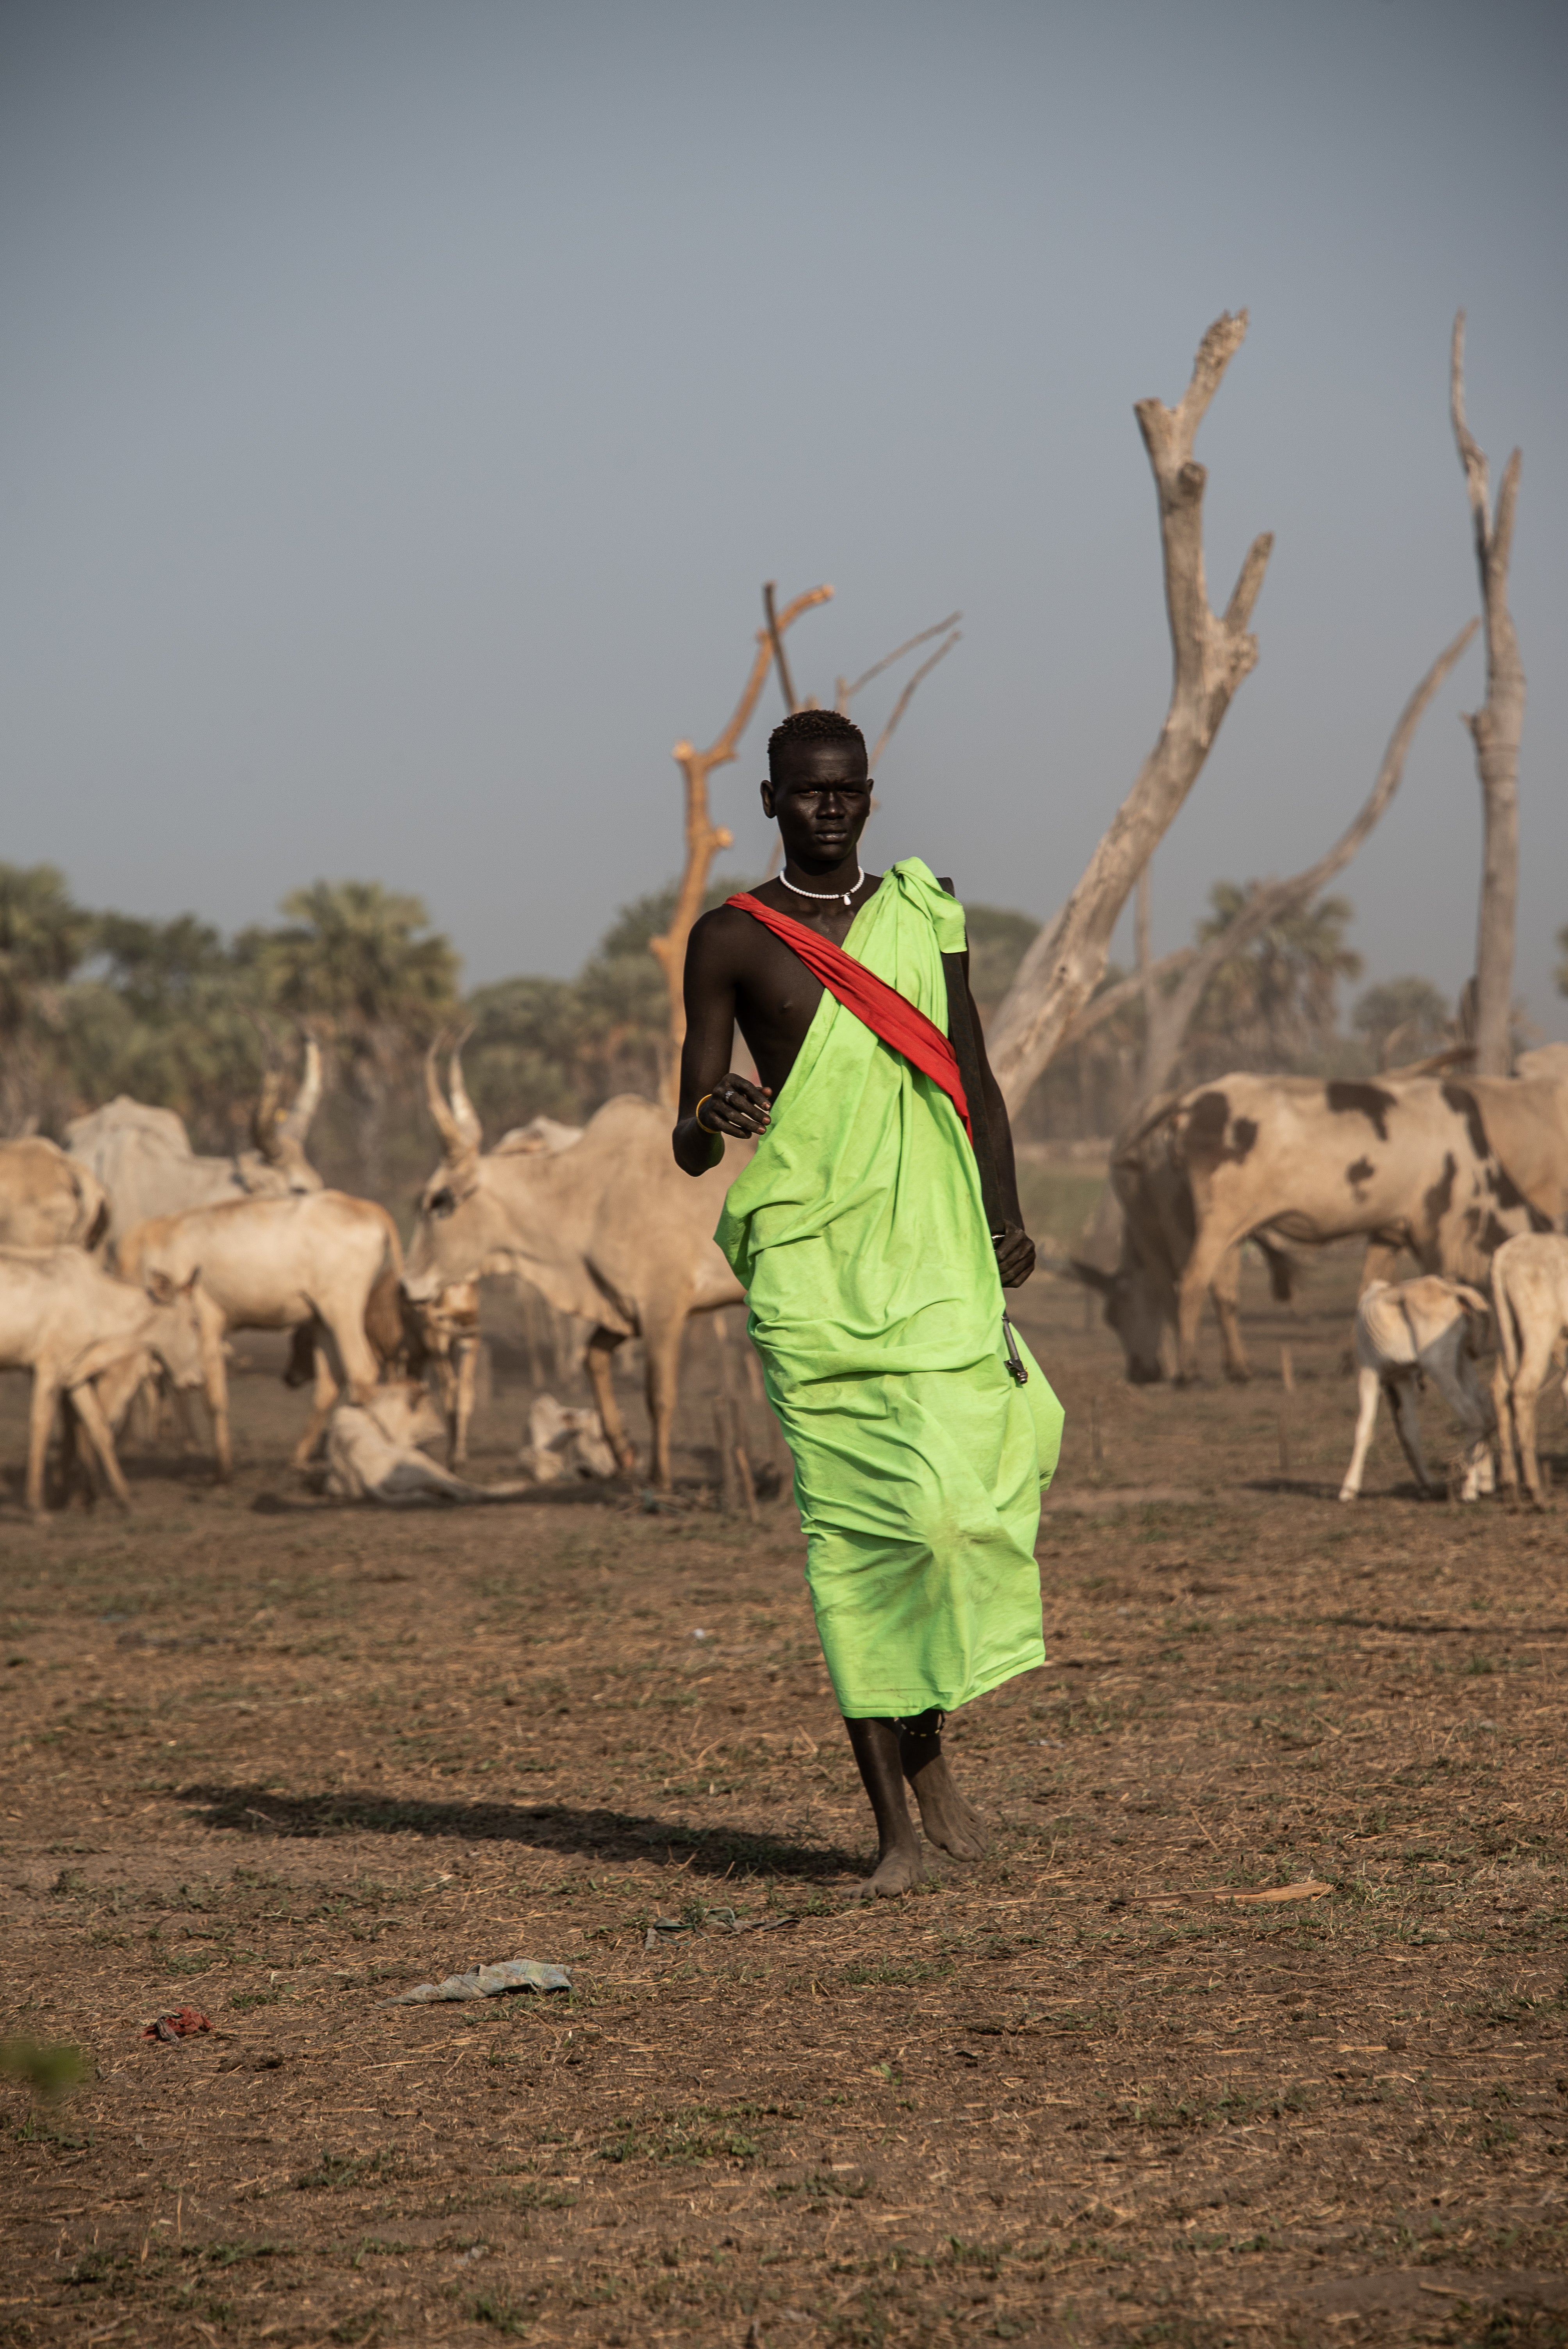 A youth at a cattle camp, where he will spend months at a time protecting livestock